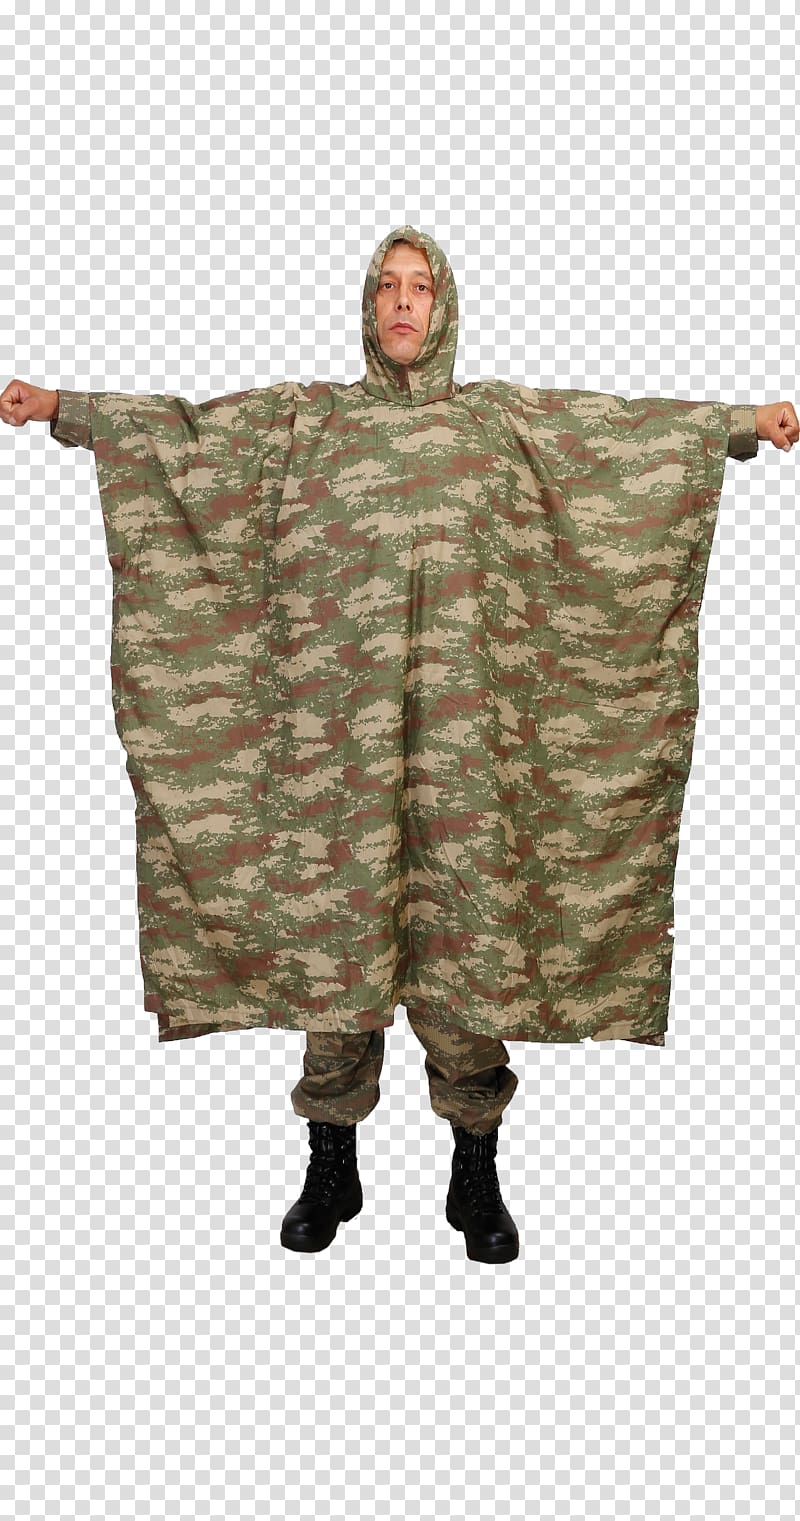 Military camouflage Military uniform Ripstop Textile, military transparent background PNG clipart